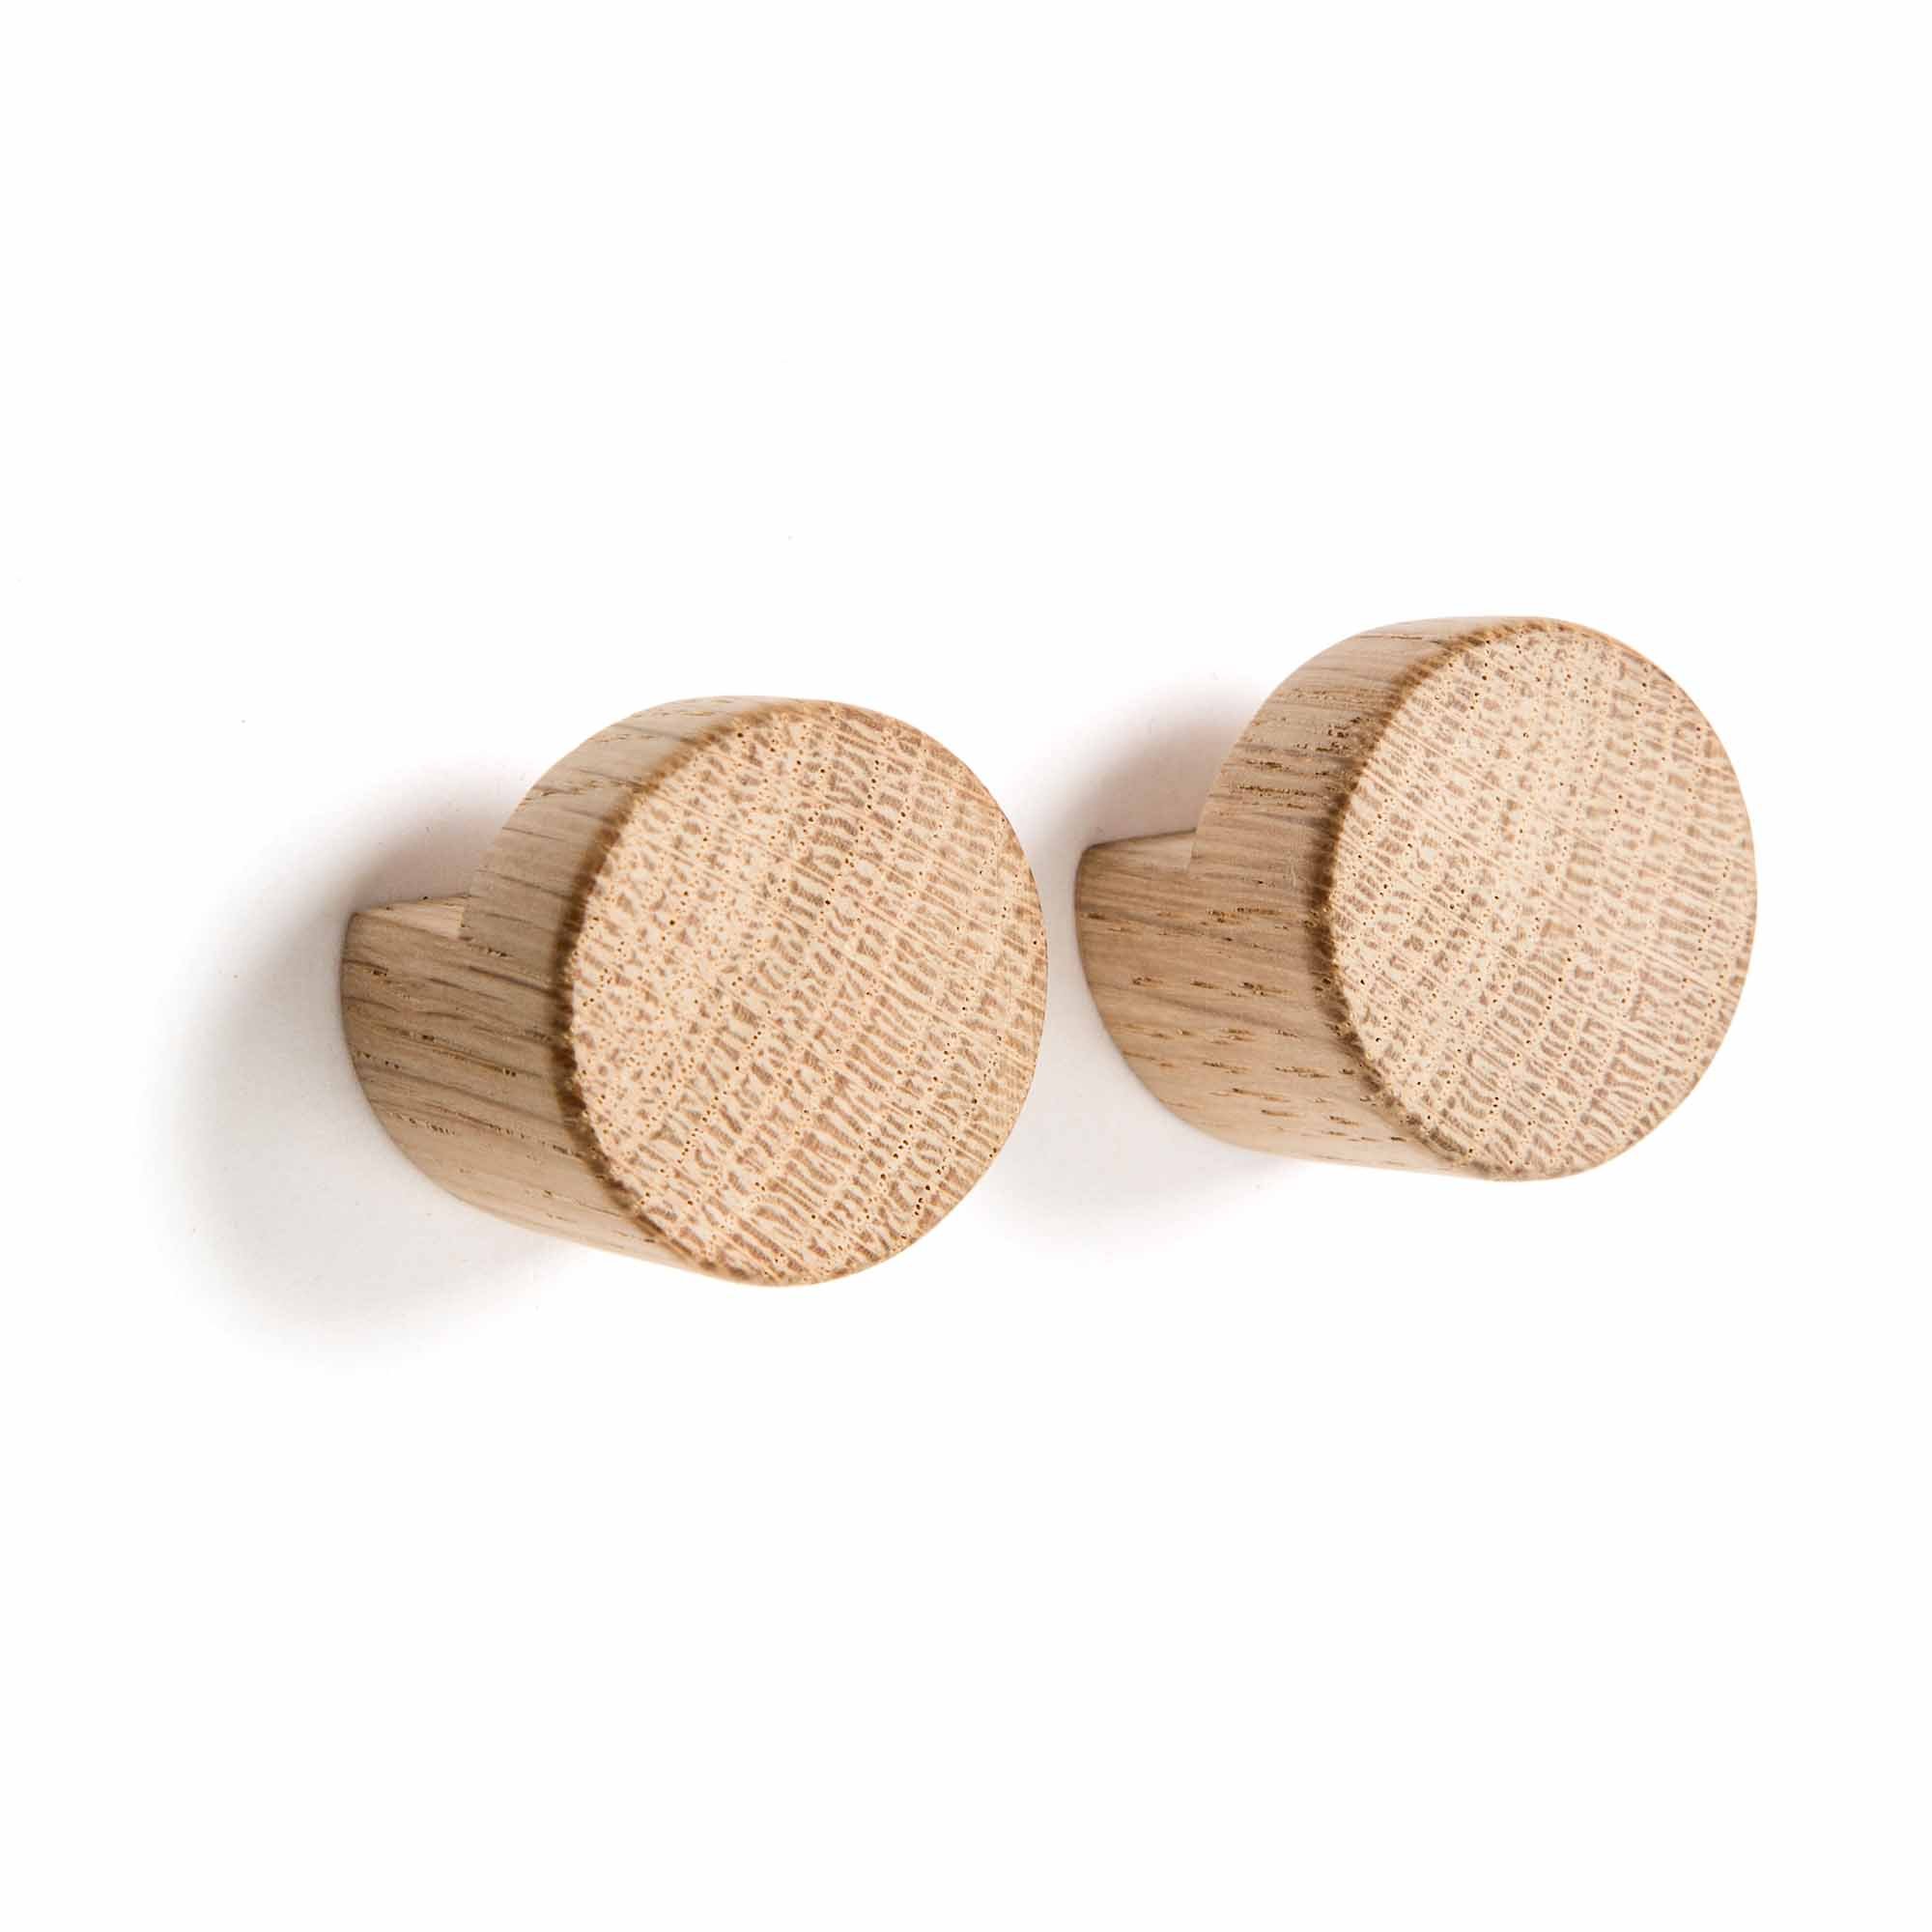 By Wirth - Wood Knot 2 pack - Nature (WKS 061)